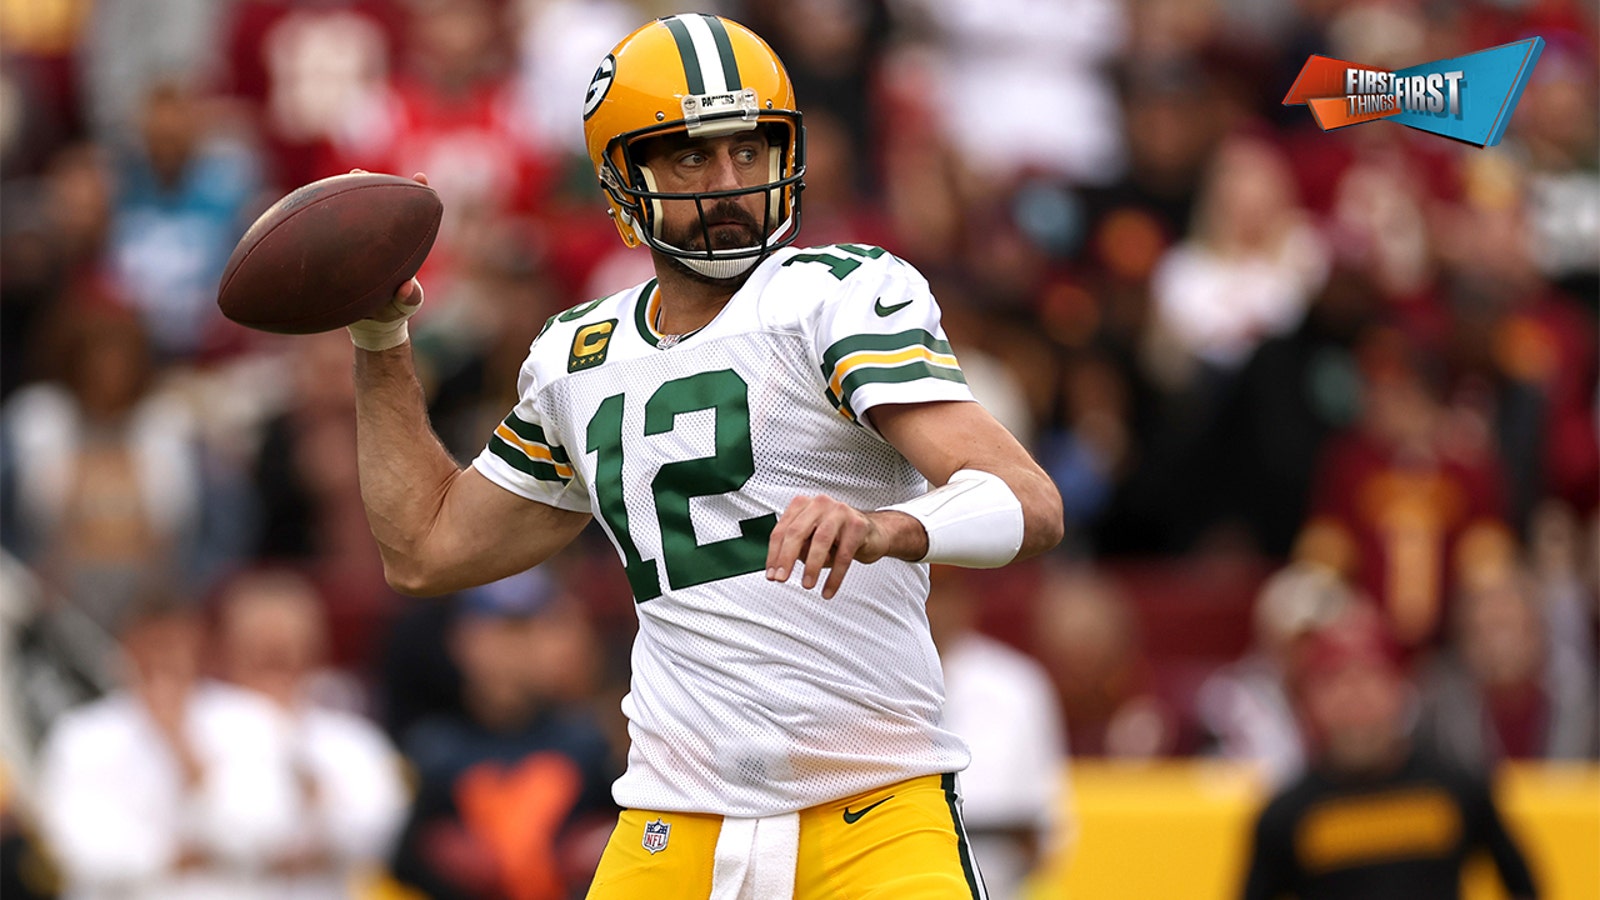 Aaron Rodgers: Teammates who make too many mistakes shouldn't play